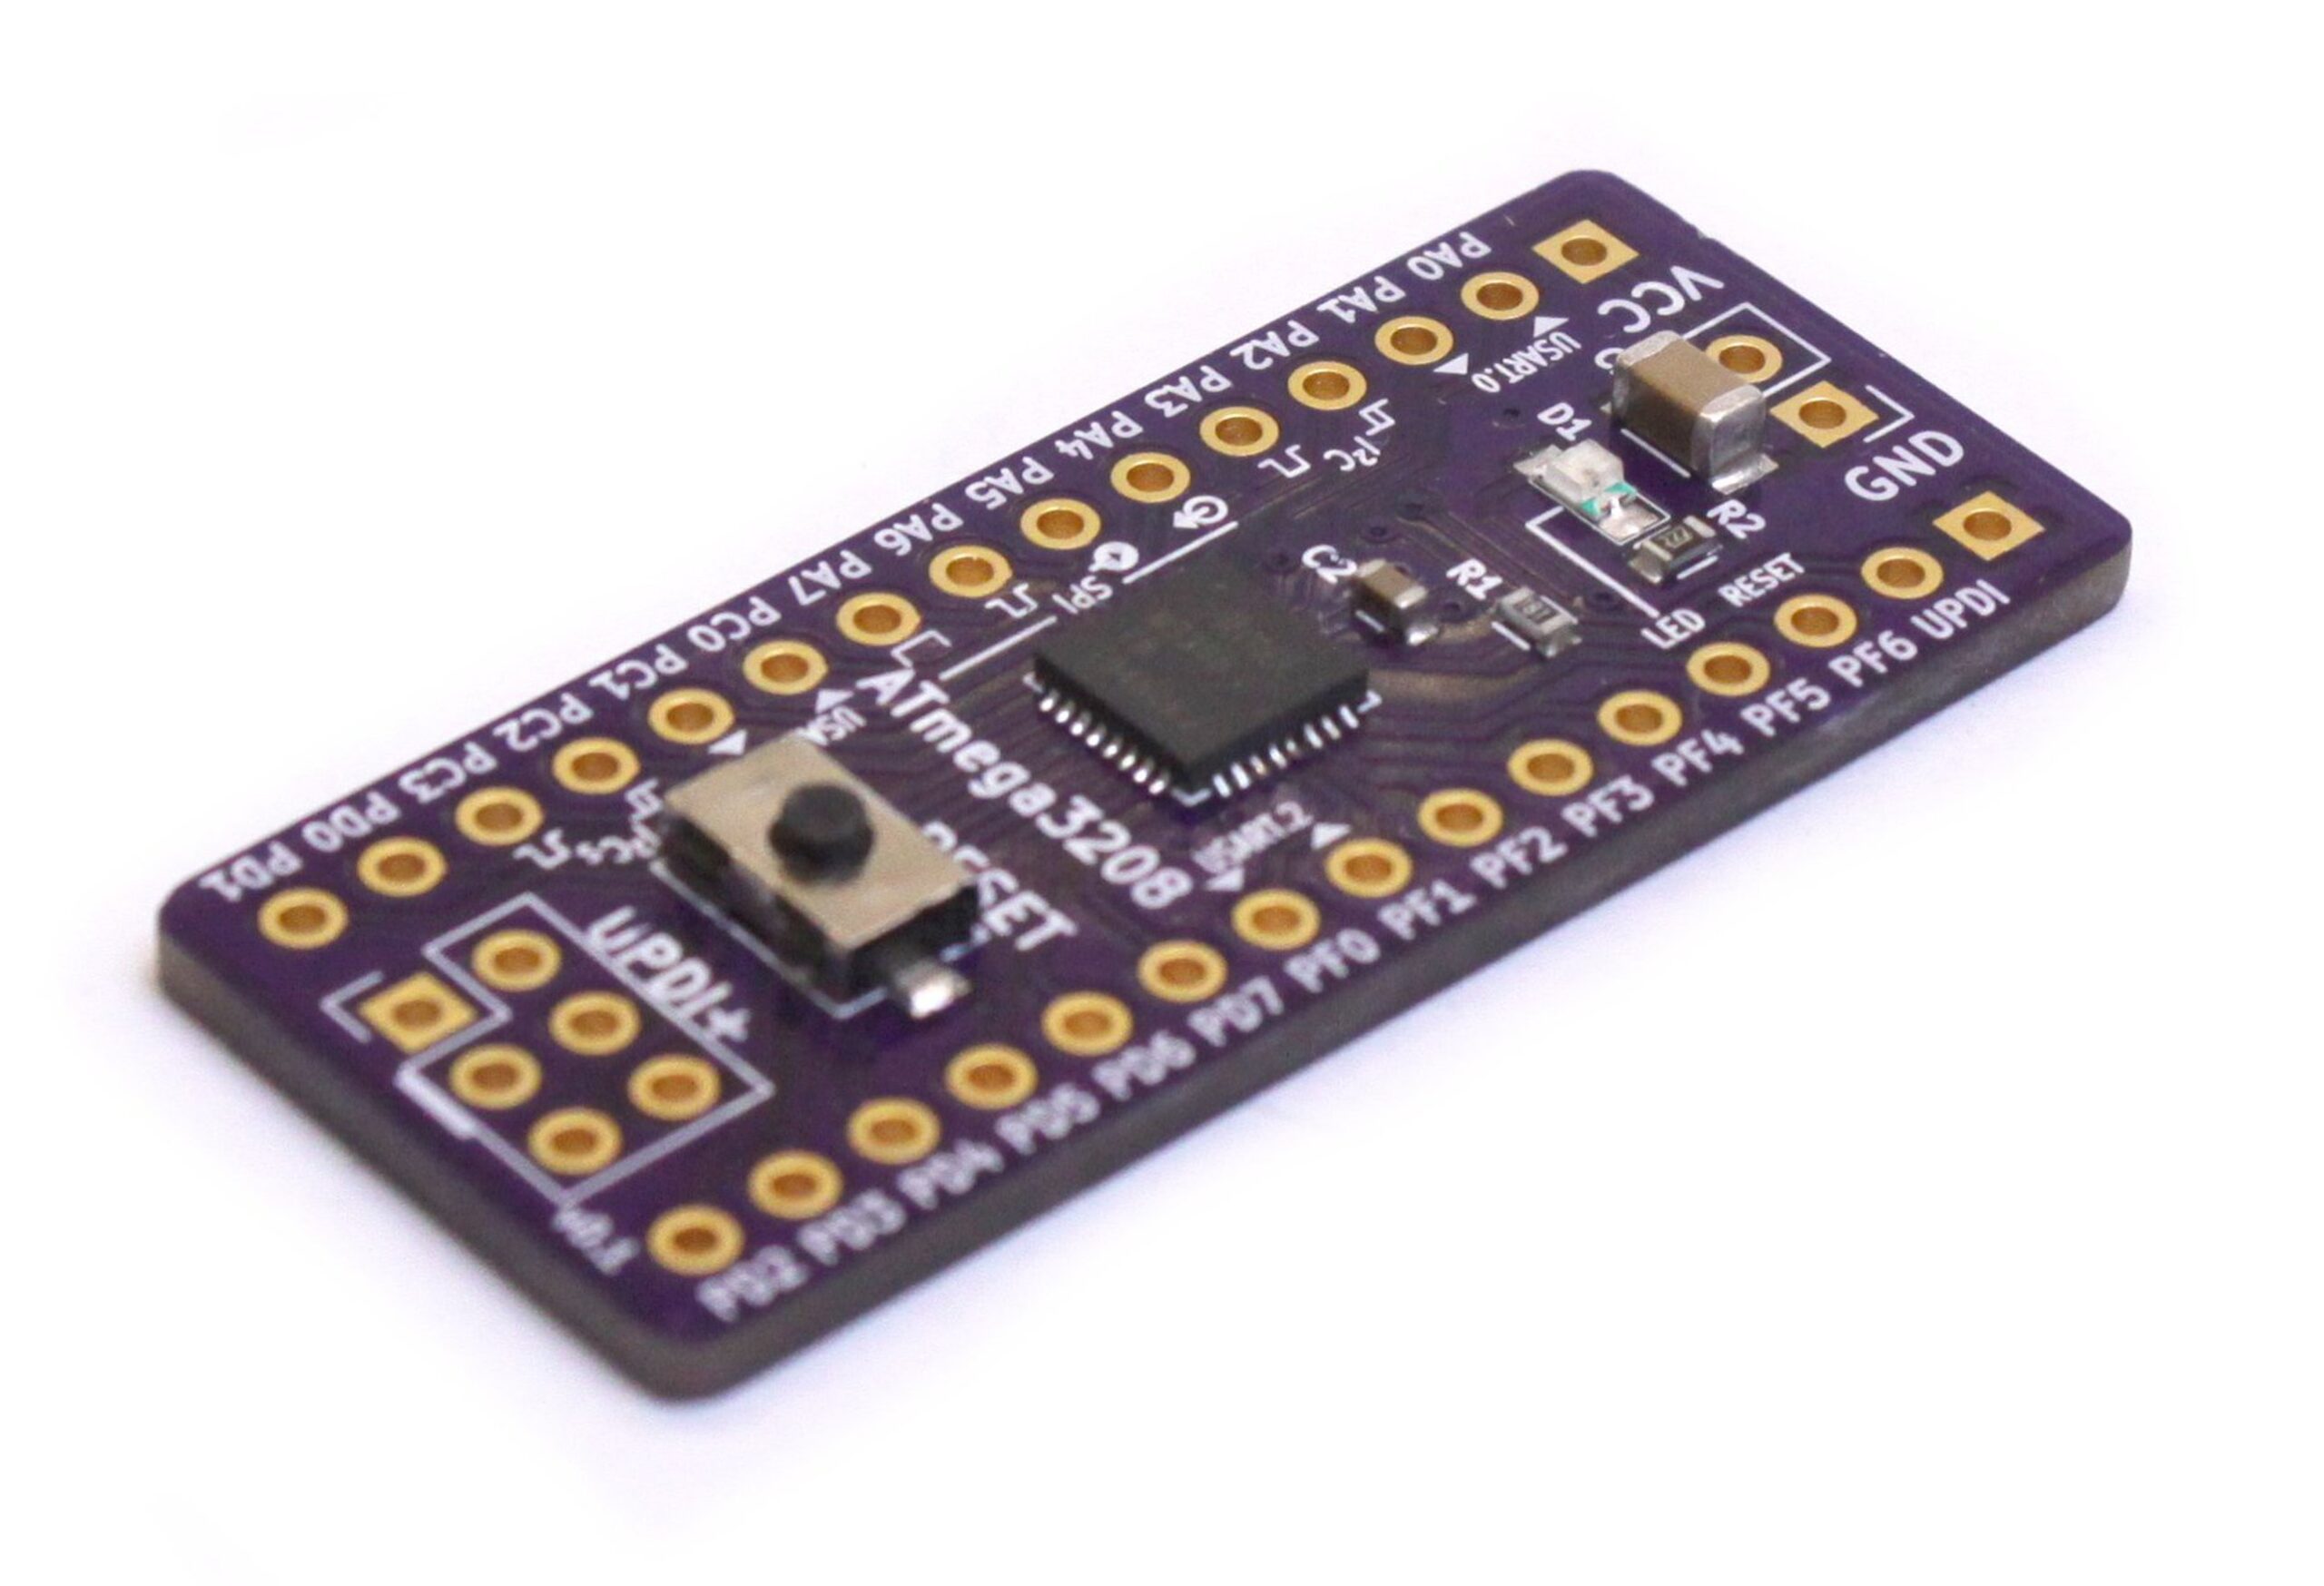 ATmega3208 Powered Development Board for Embedded Applications